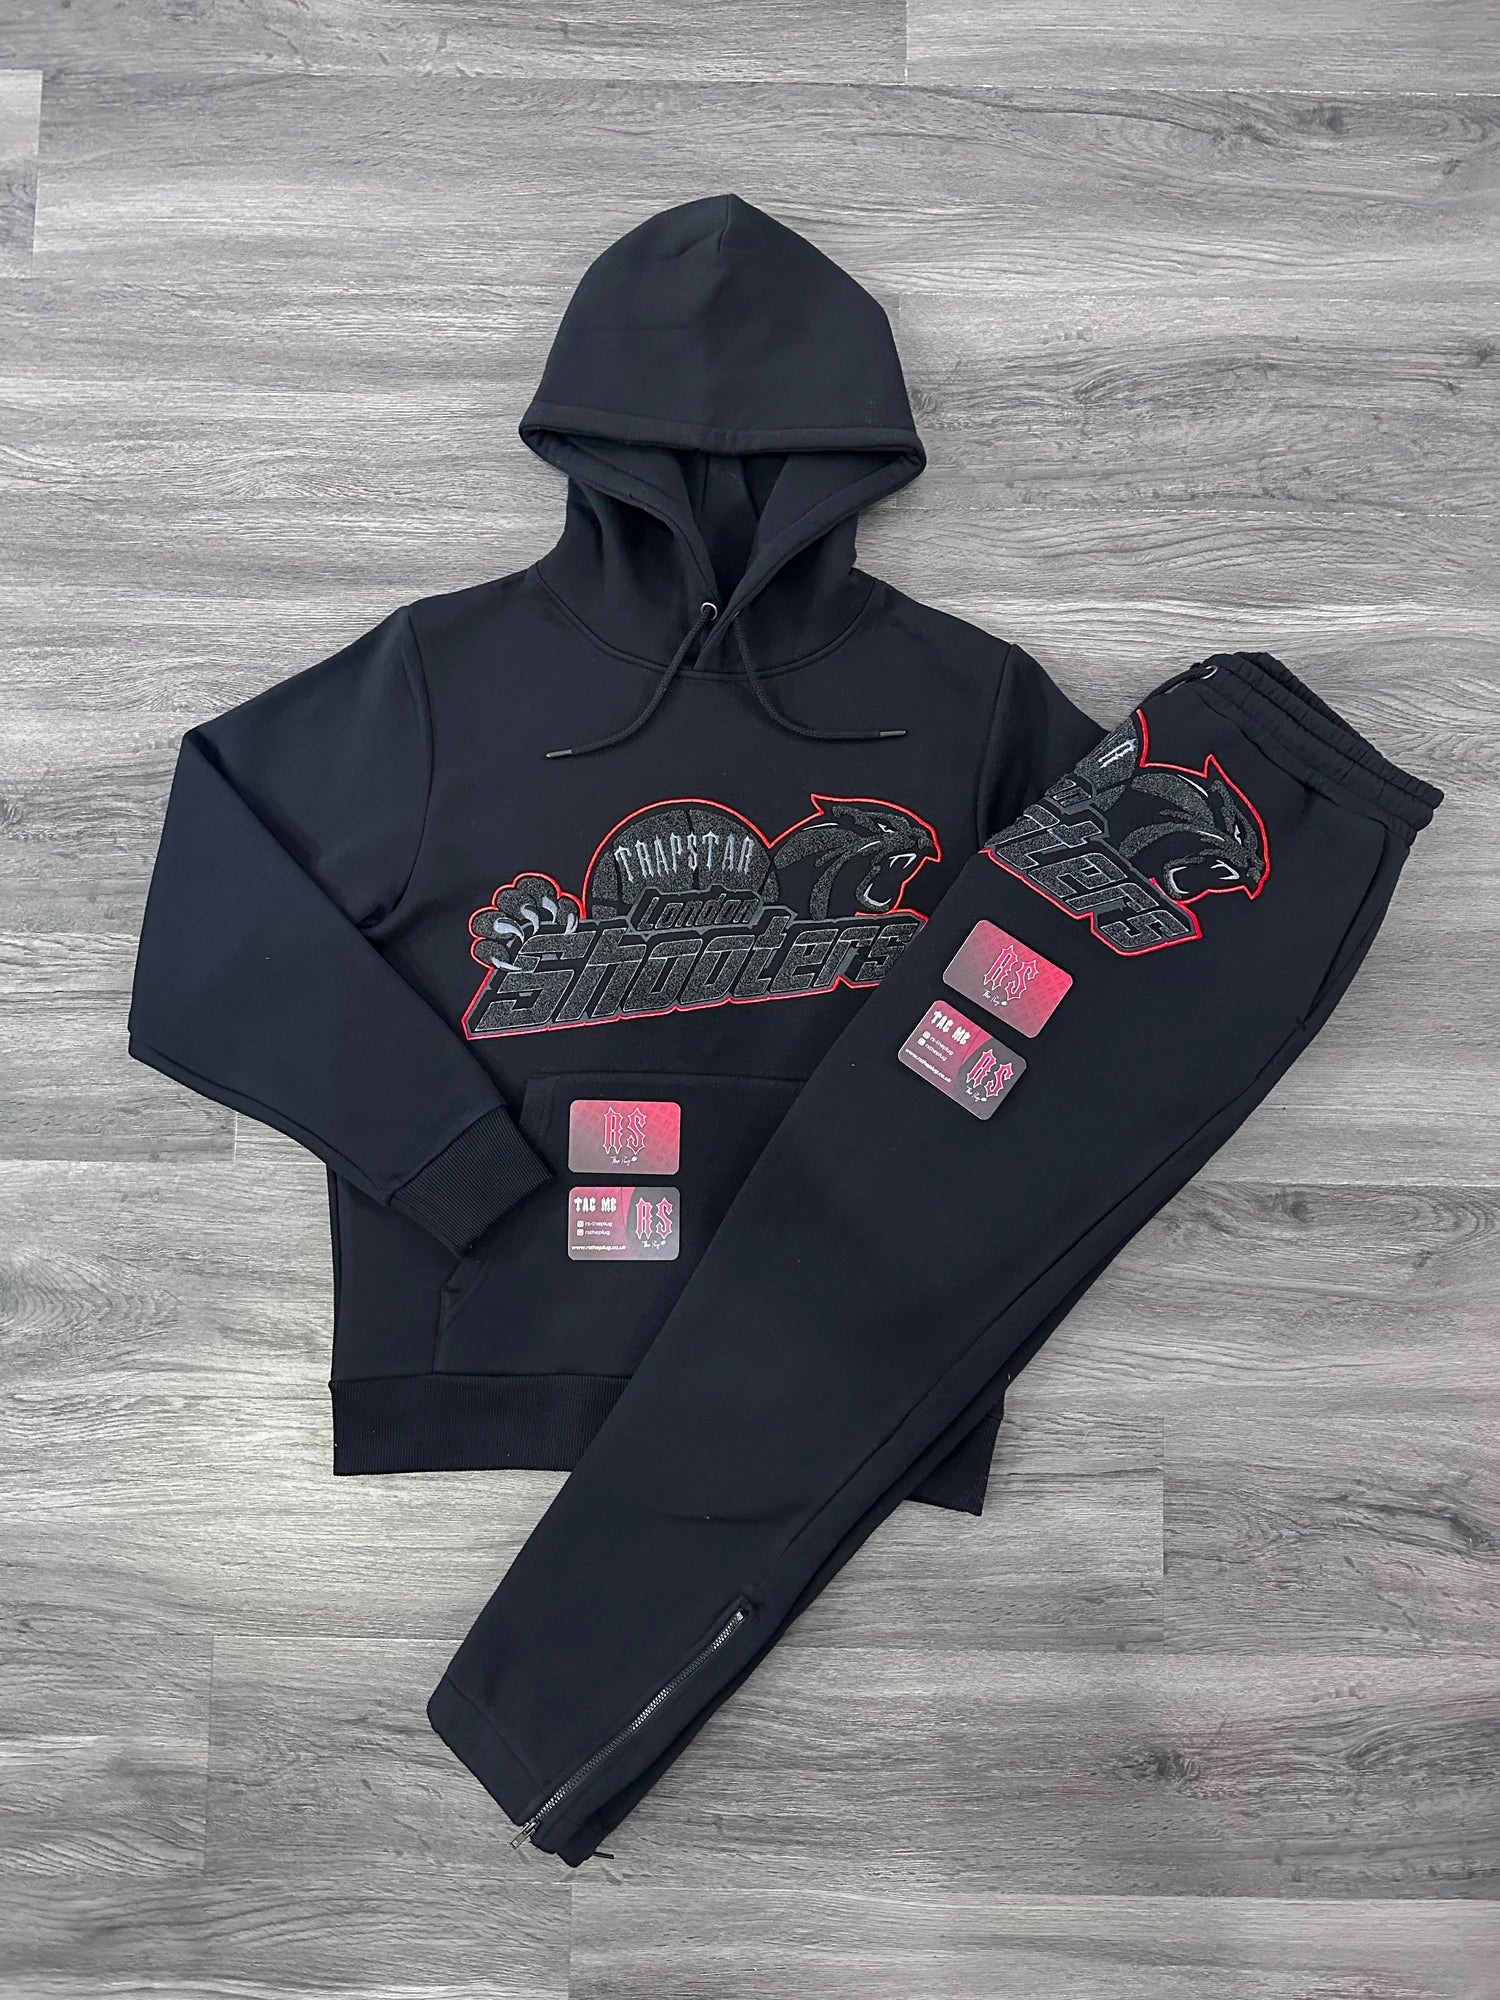 Trapstar Shooters Tracksuit Black/Red